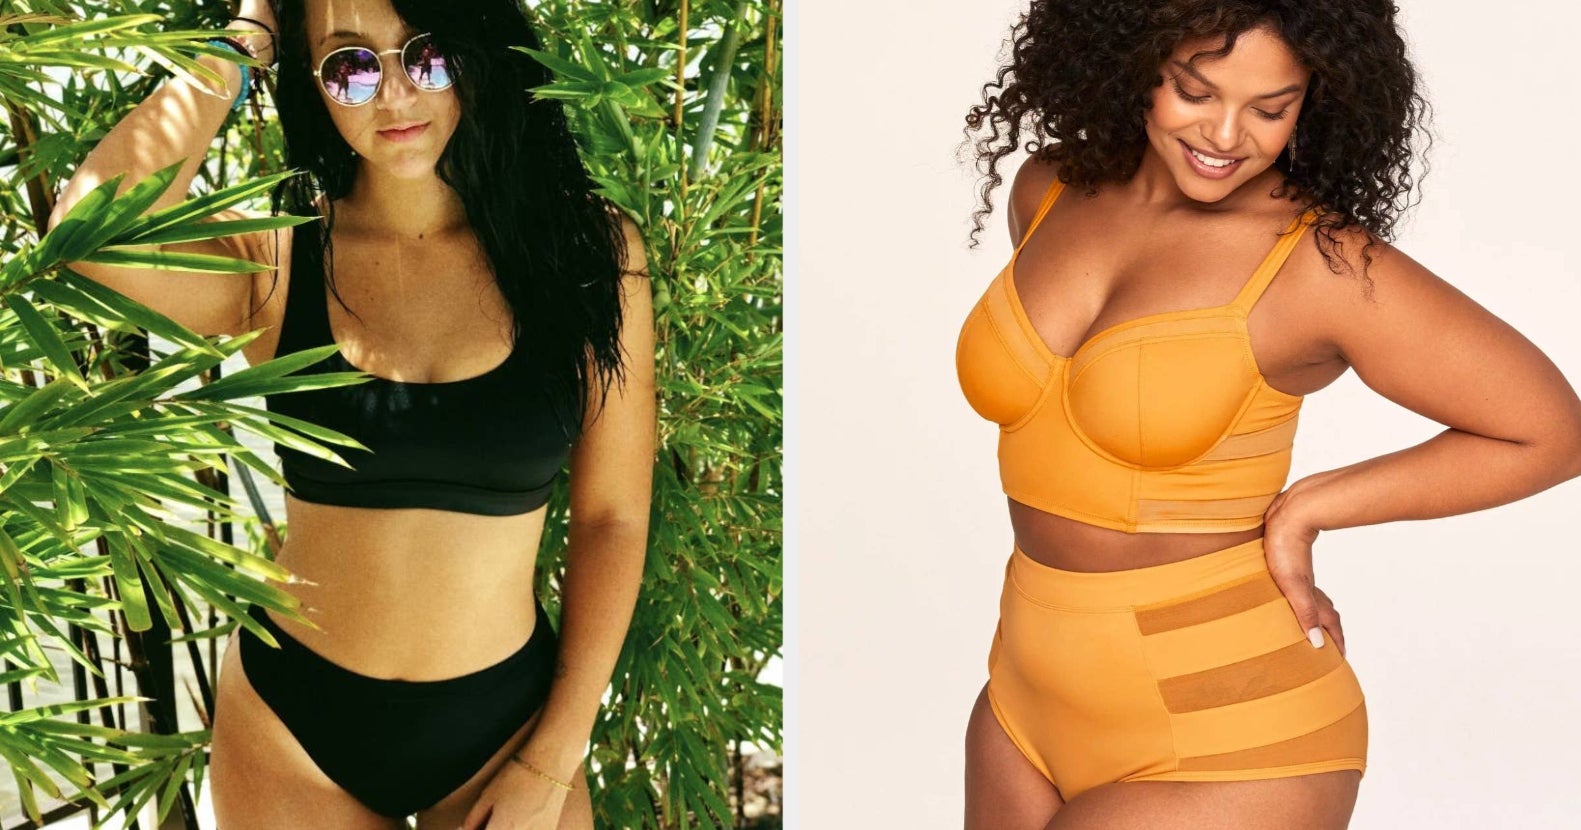 Nude Beach Fat Boobs - 37 Bathing Suits That'll Actually Support Big Boobs